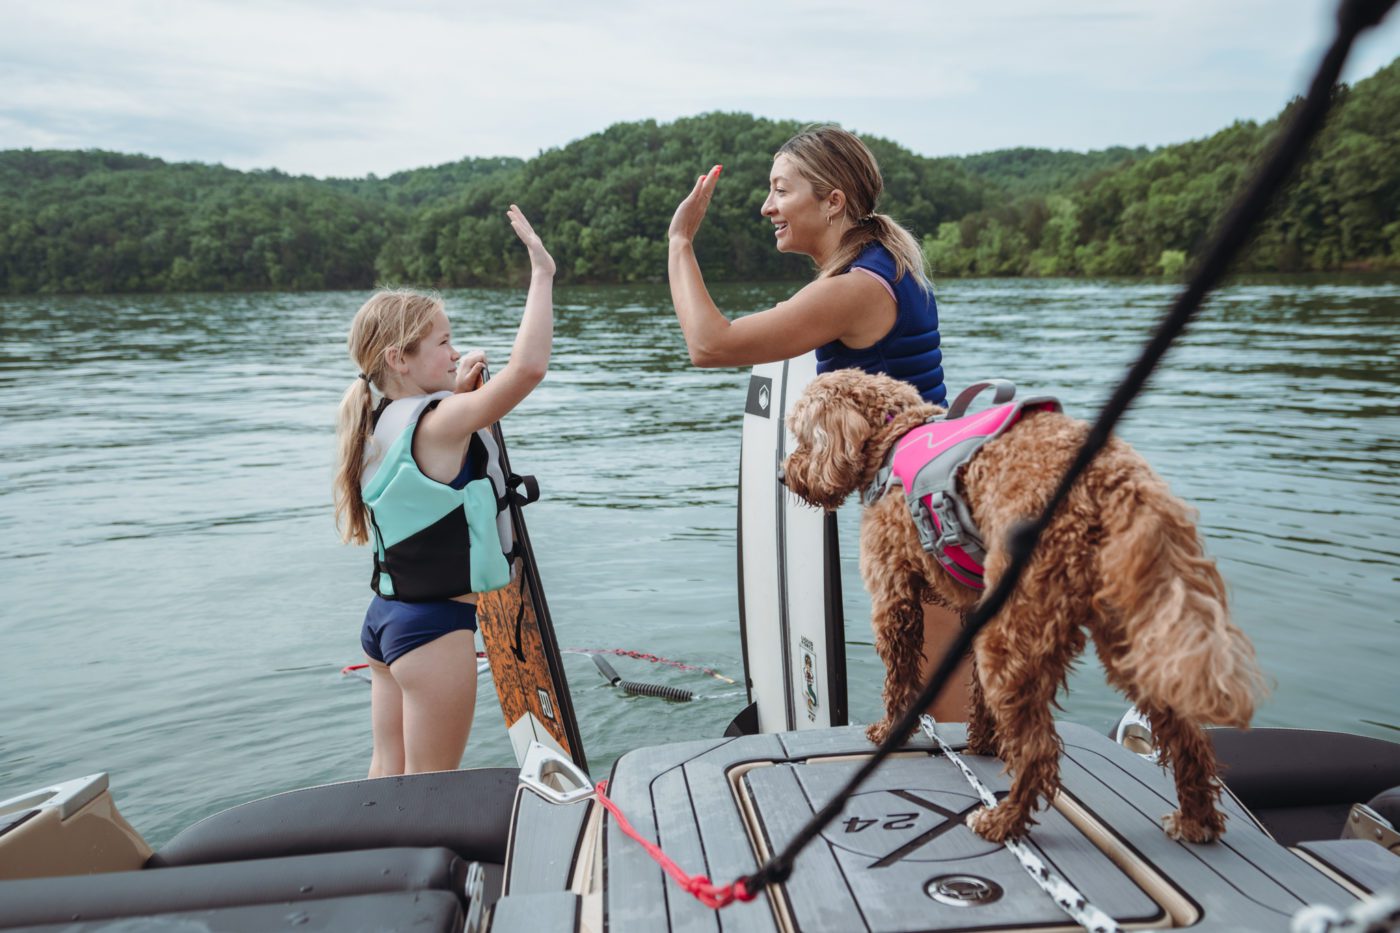 A mother and daughter high five on a MasterCraft wake boat